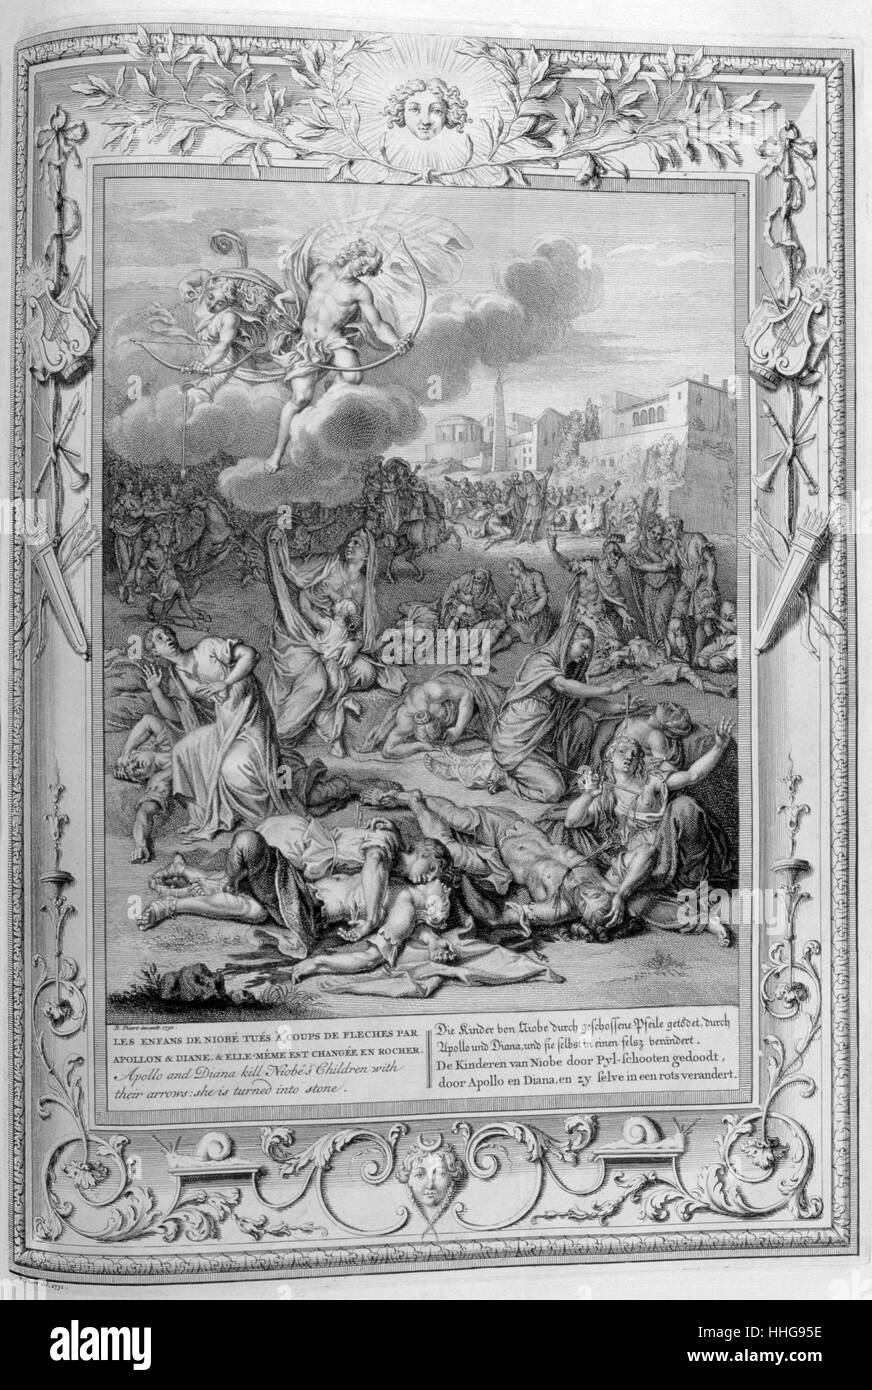 Niobe and her slain children. Engraved illustration from 'The Temple of the Muses', 1733. This book represented remarkable events of antiquity drawn and engraved by Bernard Picart (1673-1733). In Greek mythology, Niobe was punished by Leto, who sent Apollo and Artemis to slay all of her children. Niobe boasted of her fourteen children, seven male and seven female (the Niobids), to Leto who only had two children, the twins Apollo and Artemis. Stock Photo